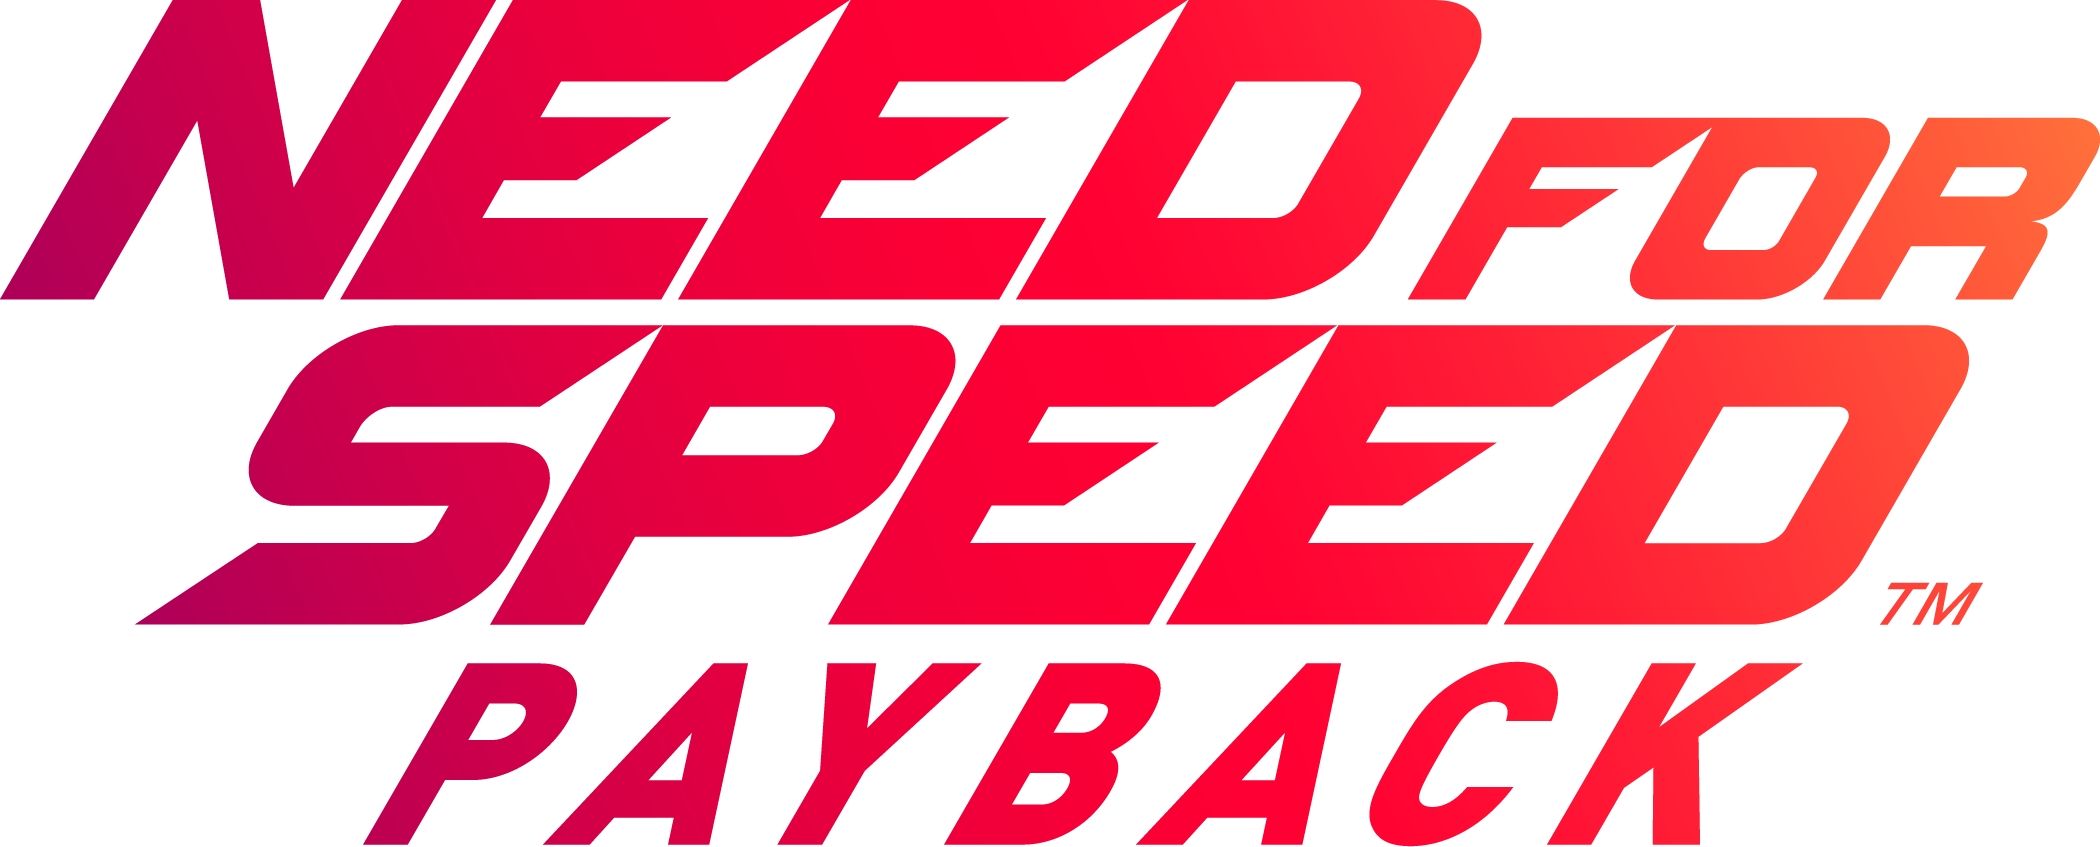 Comprar o Need for Speed™ Payback